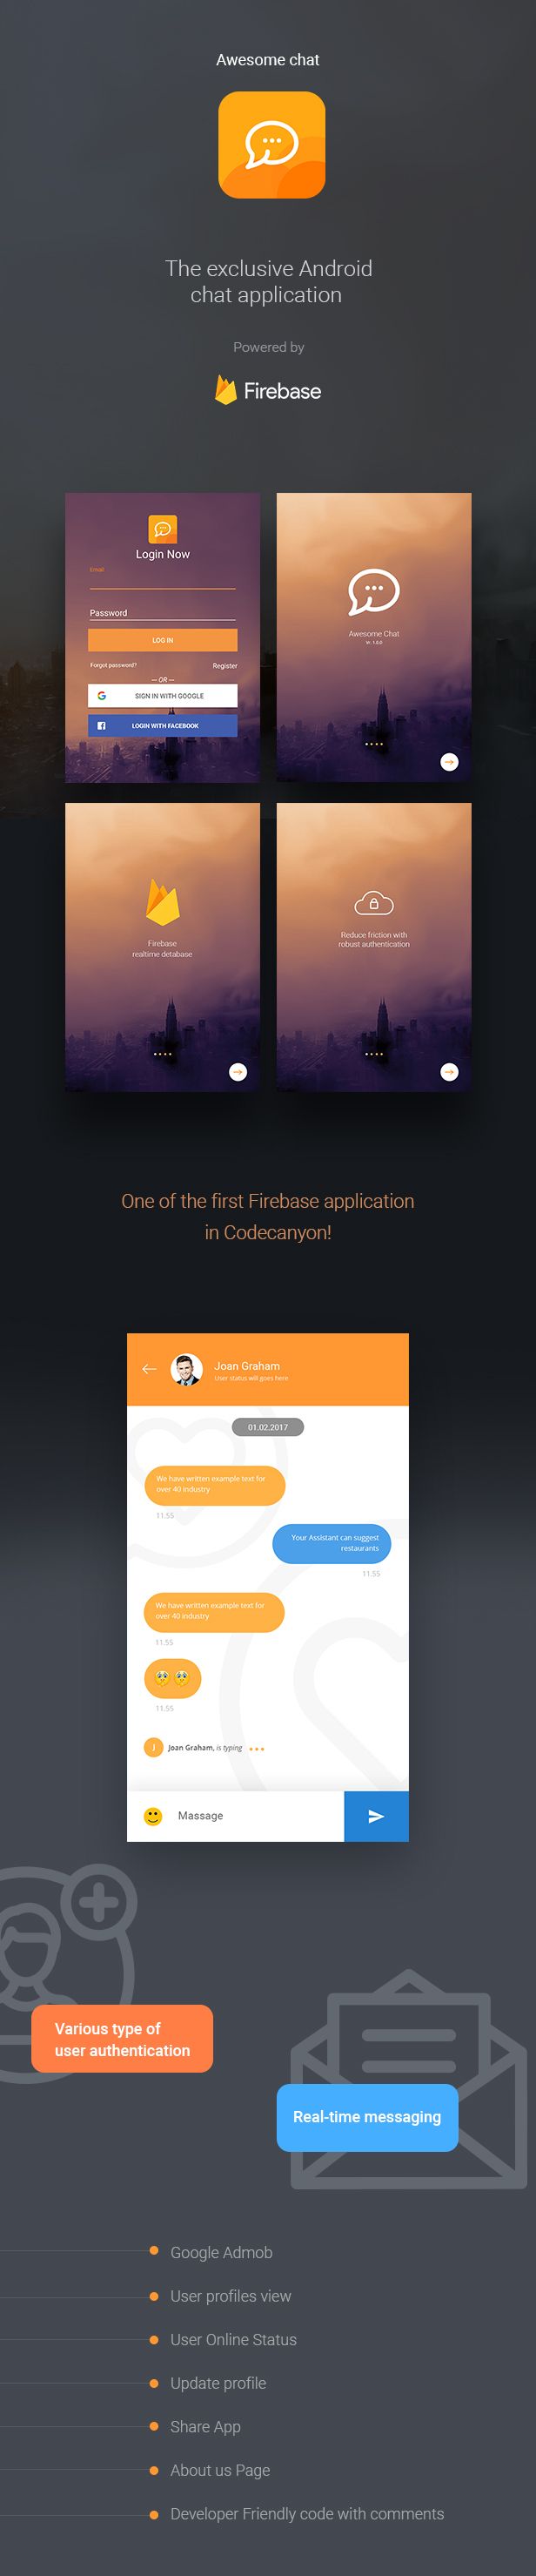 Awesome Chat - Android Firebase Real-time Mobile Application - 3